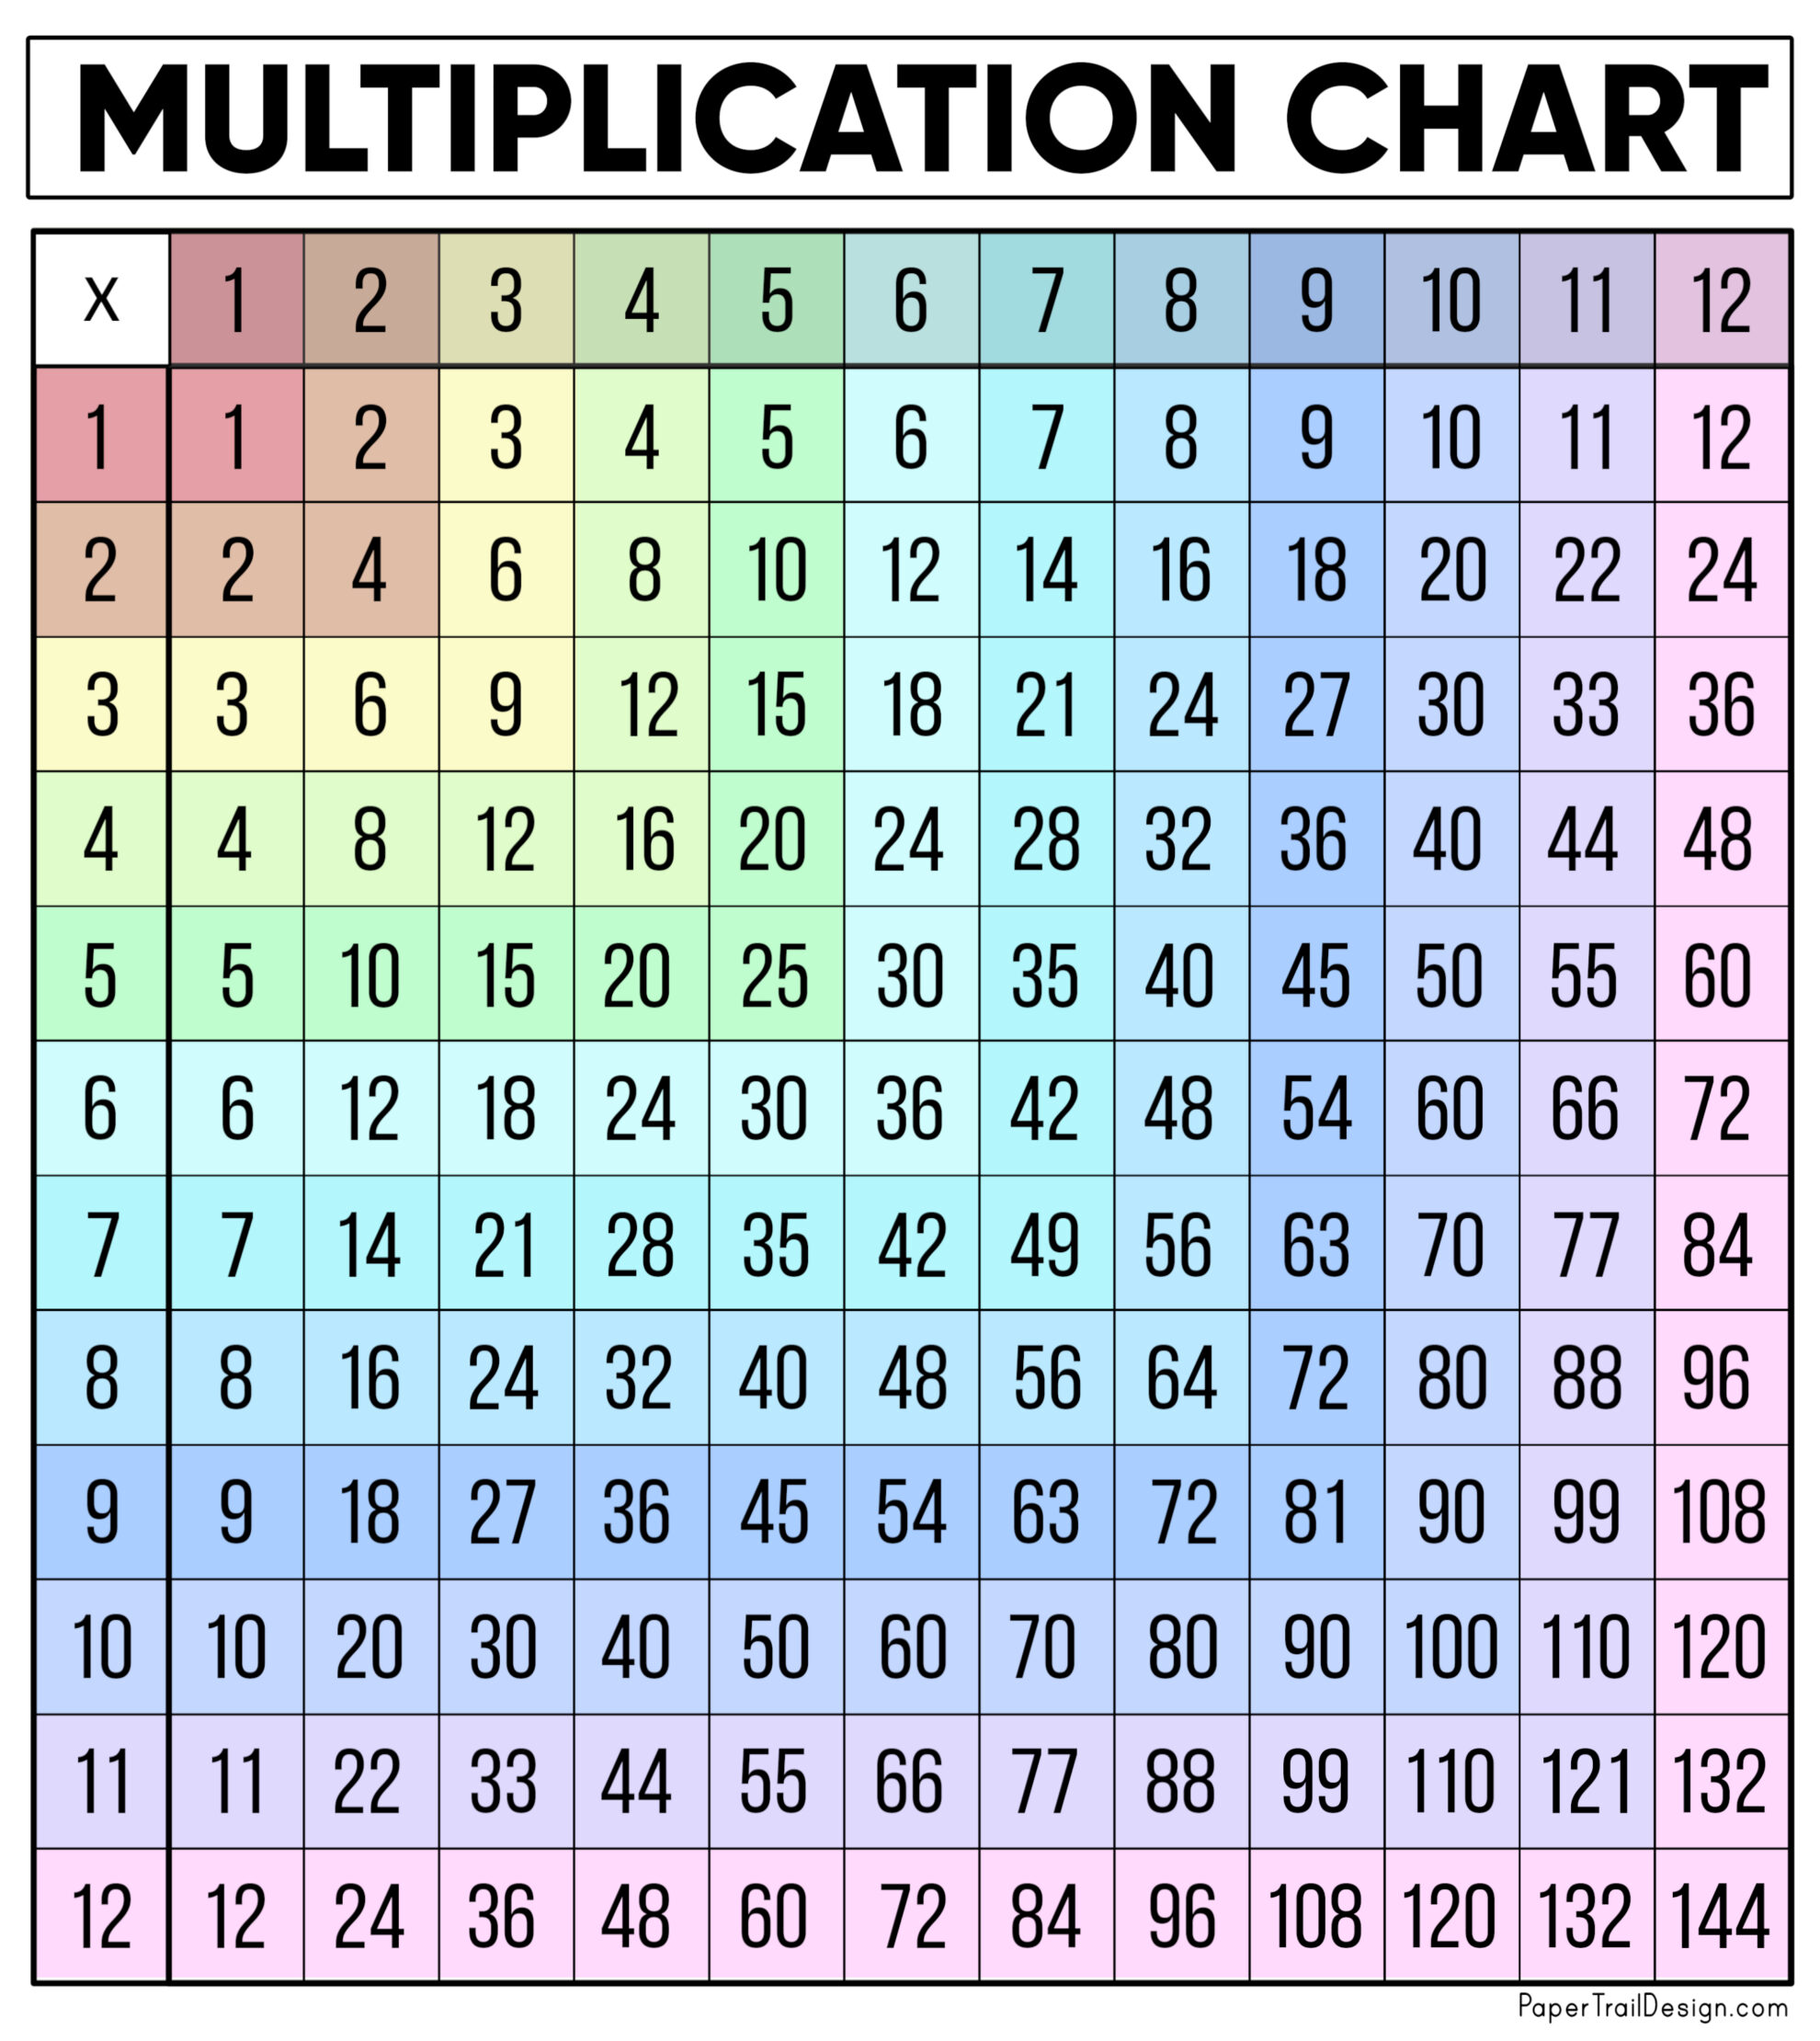 4 x tables chart